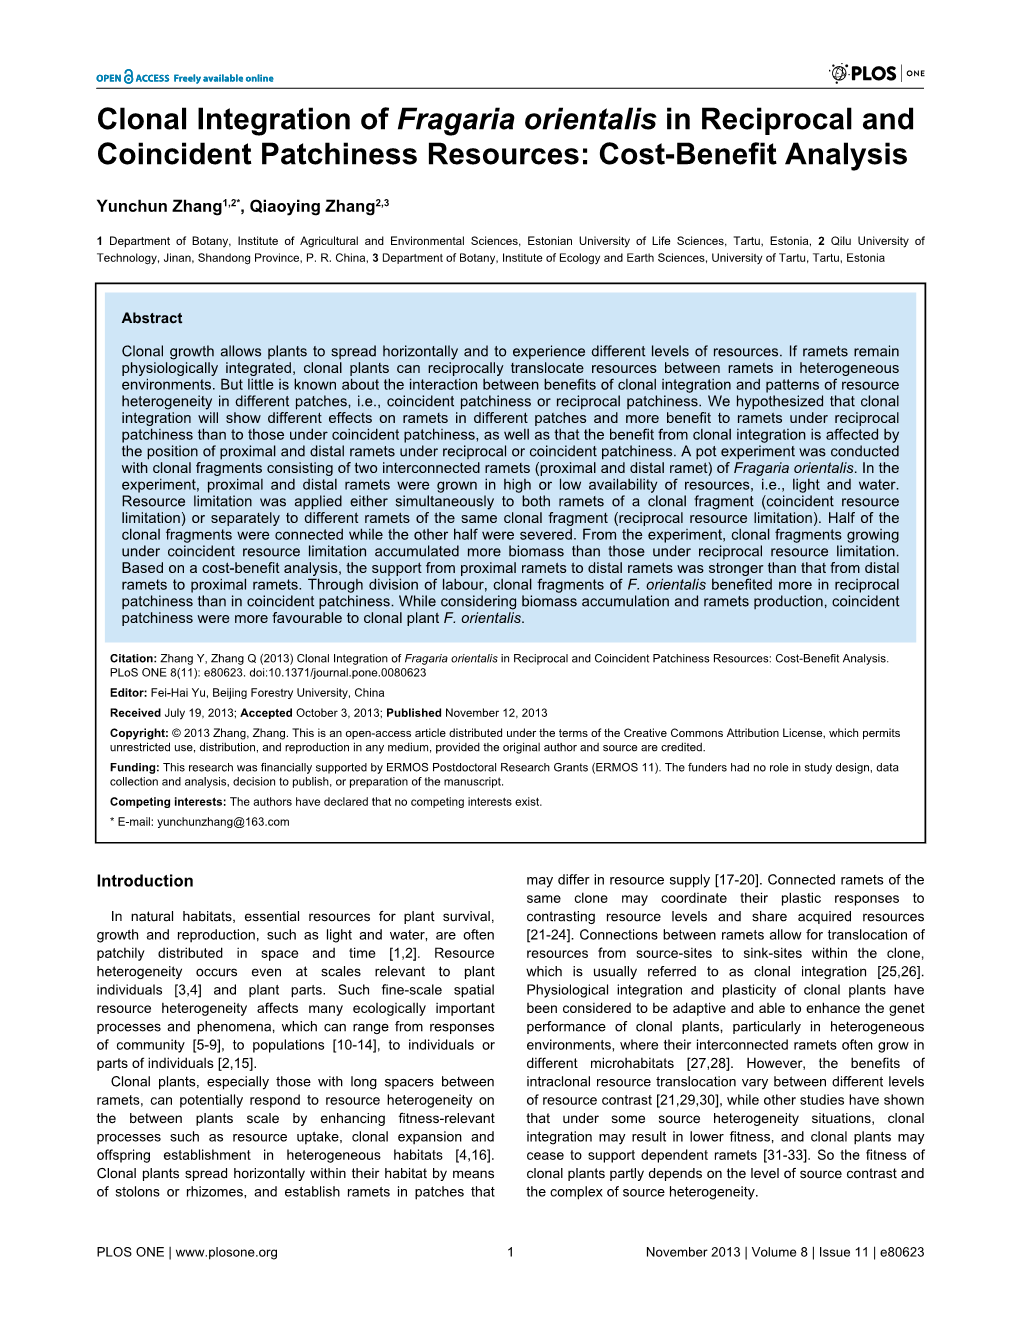 Clonal Integration of Fragaria Orientalis in Reciprocal and Coincident Patchiness Resources: Cost-Benefit Analysis